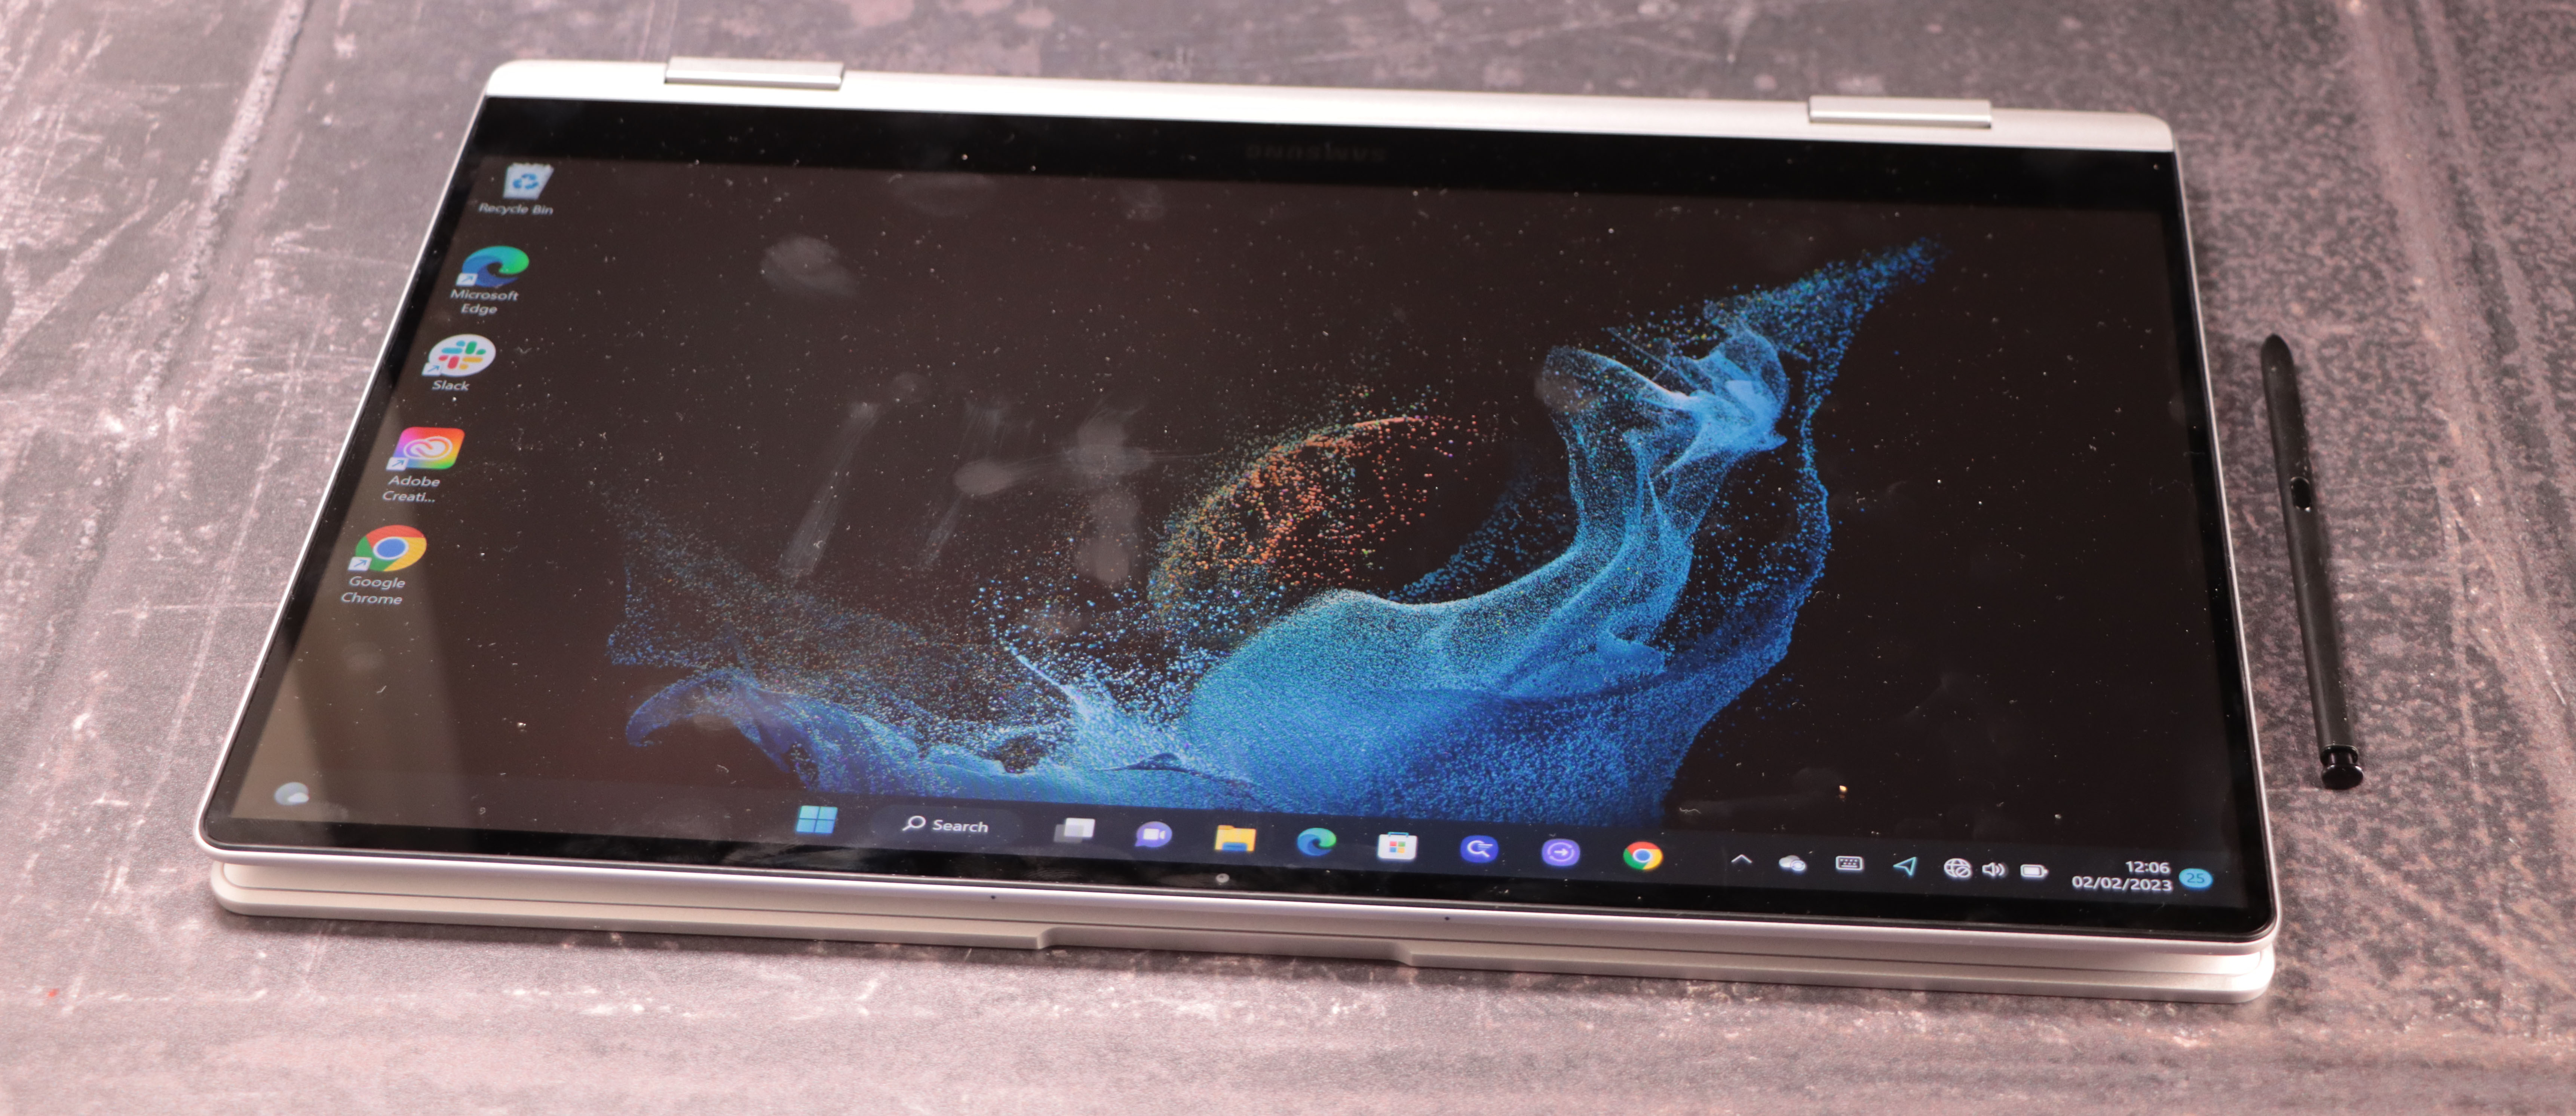 Samsung Galaxy Book2 Pro 360 Review: Just Good, Not Great